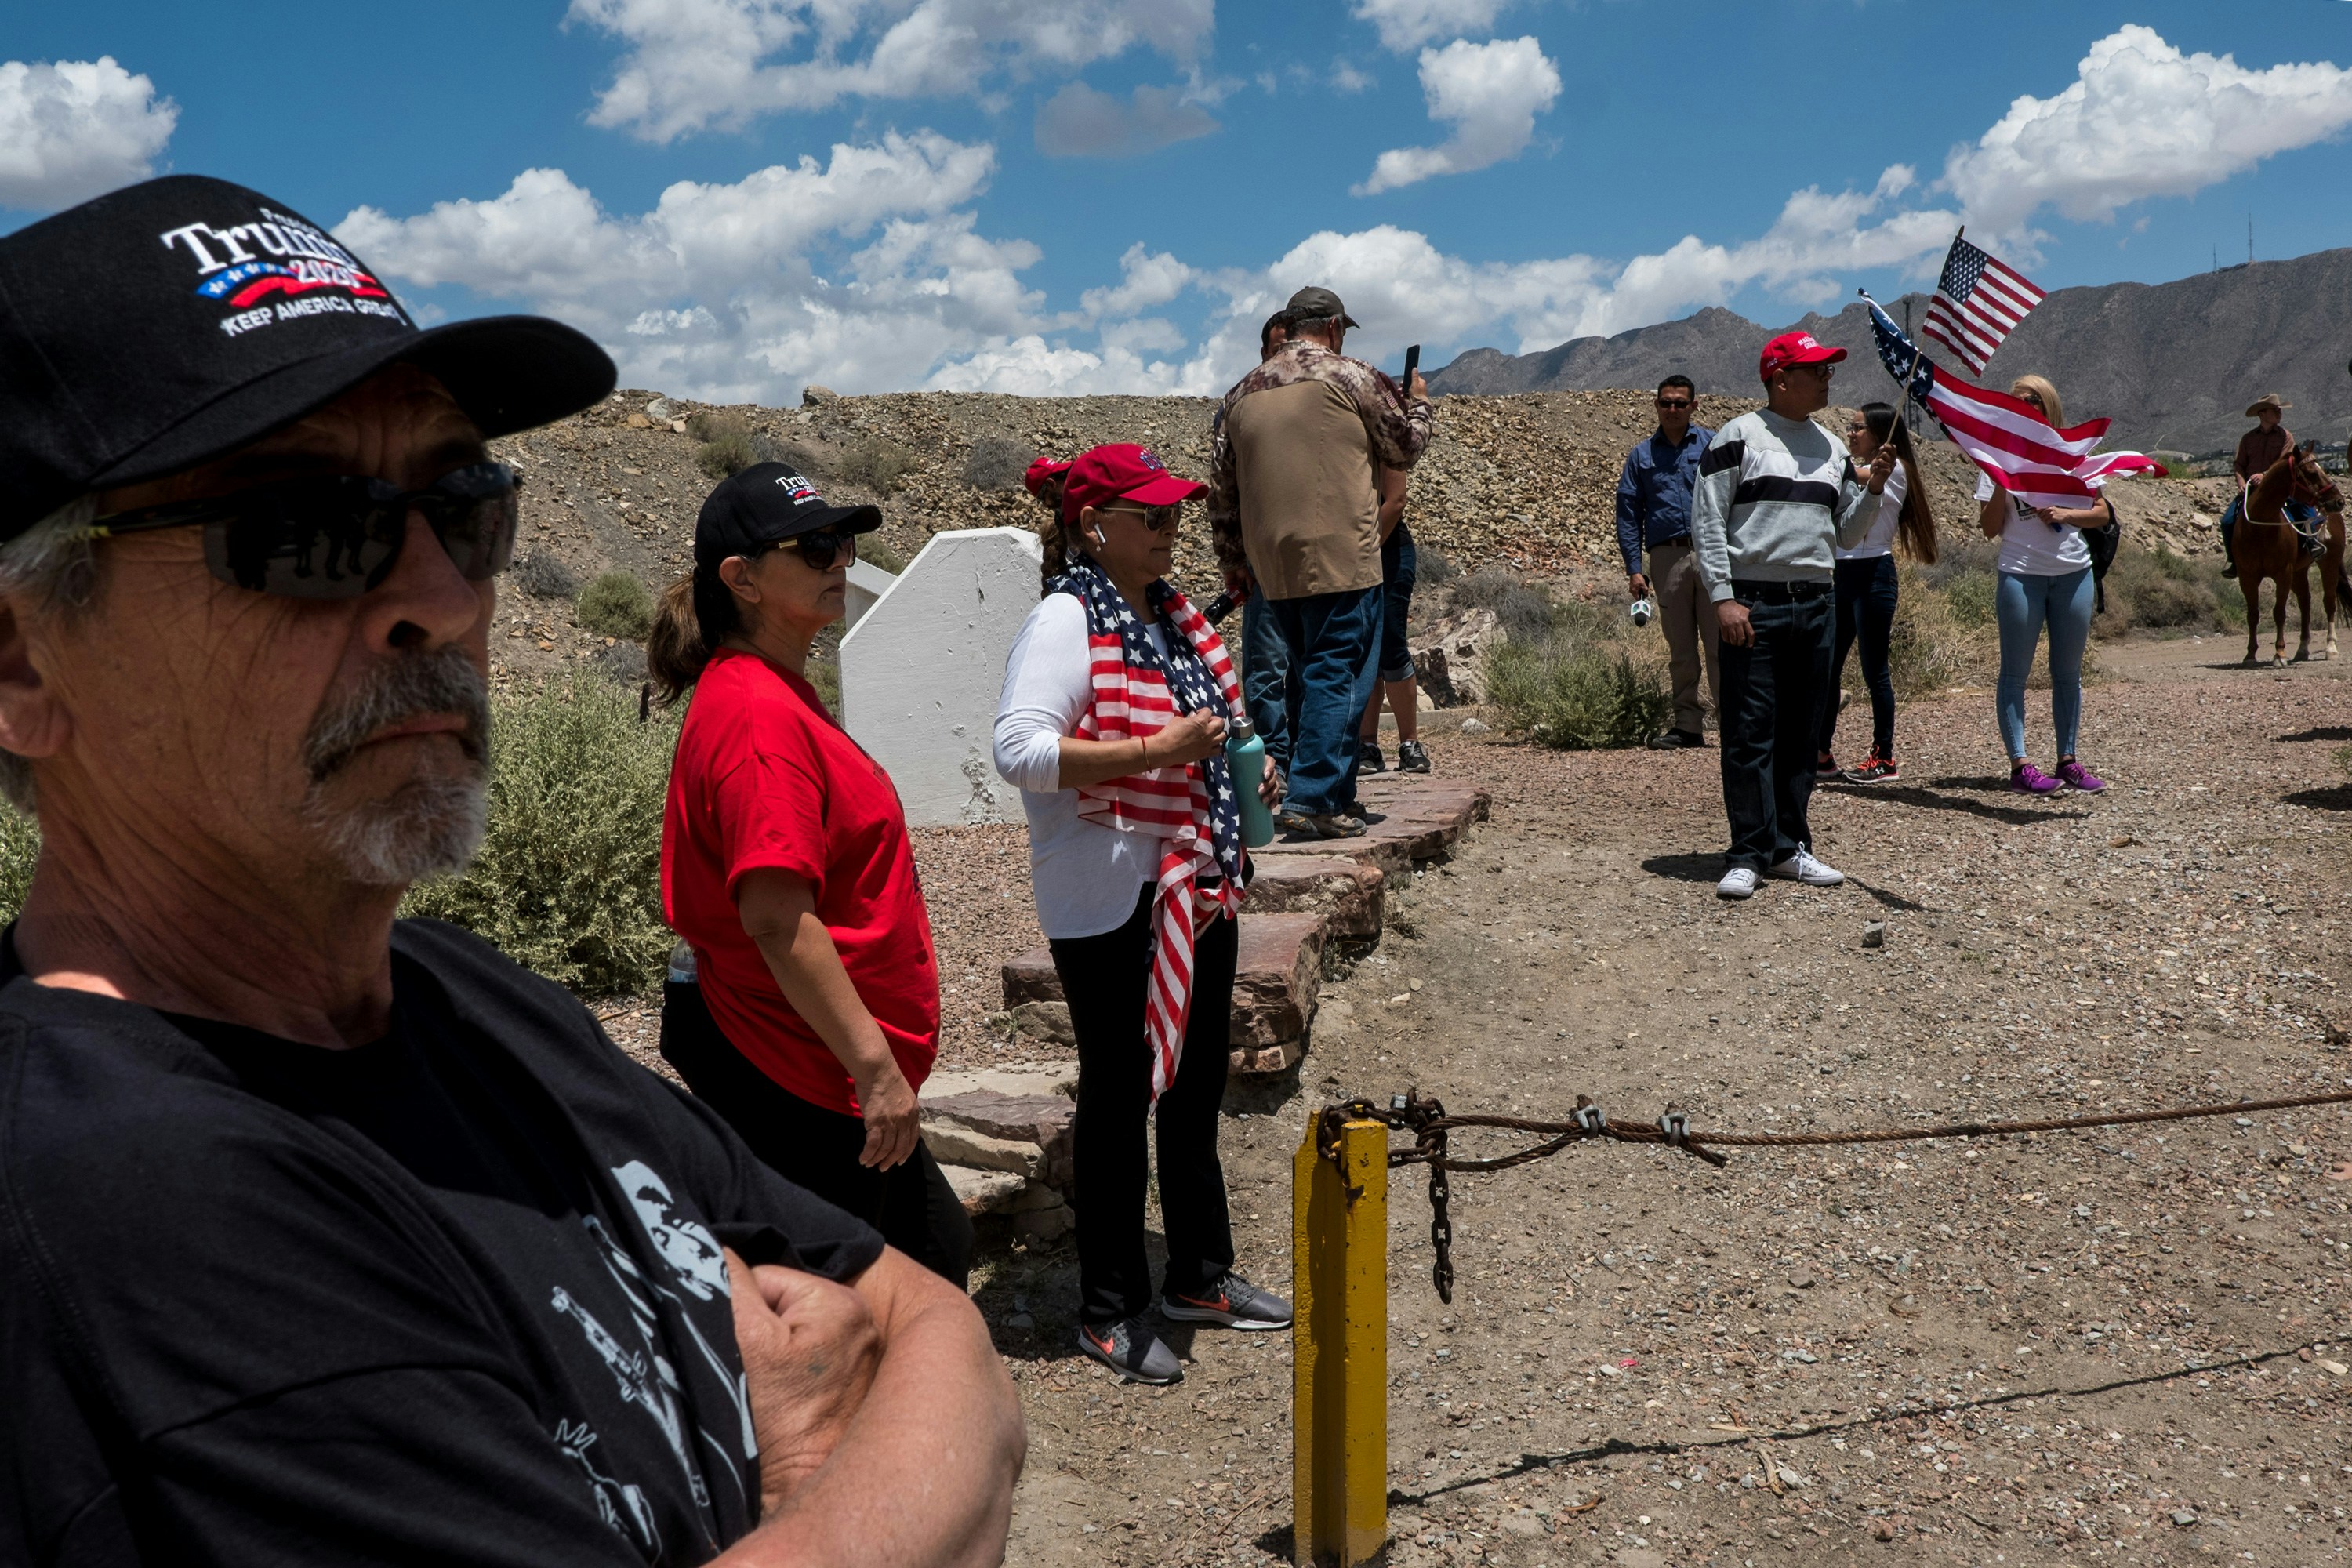 Sam Esquivel, left, Nancy Esquivel and Jacqueline Torres gather near Monument One at the U.S.-México border on the outskirts of Sunland Park, New Mexico, Saturday, May 11, 2019. (Joel Angel Juárez for The Intercept)